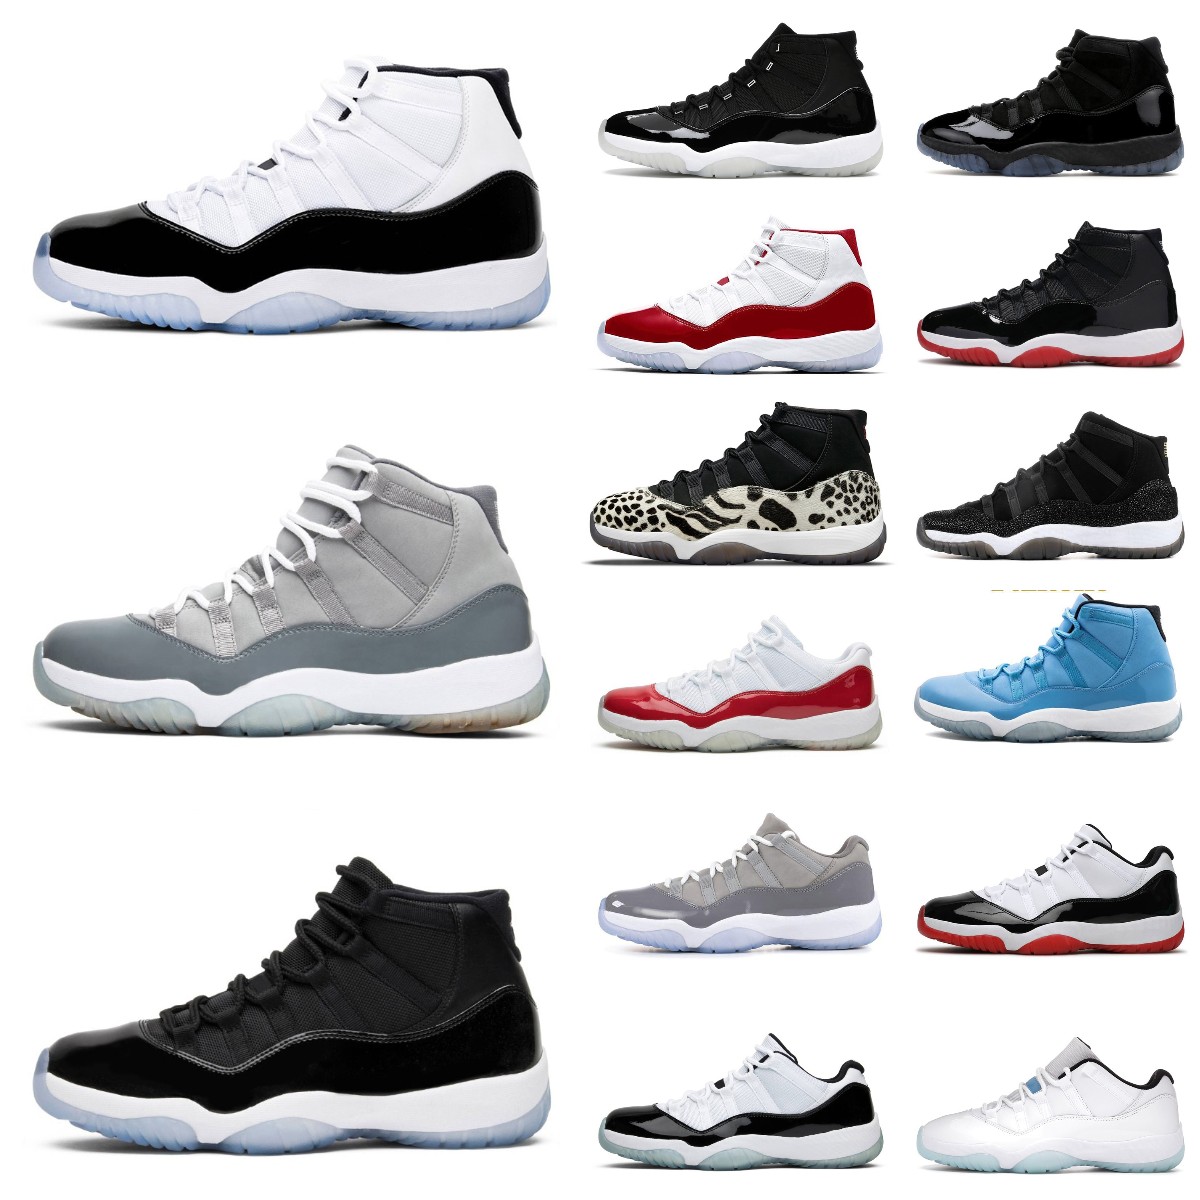 2023 NEW Mens Jumpman 11 Basketball Shoes Cool Grey 11s Sneakers Concord Space Jam Jubilee Cherry Legend Blue Bred Pure Violet UNC Sports Women Trainers 36-47